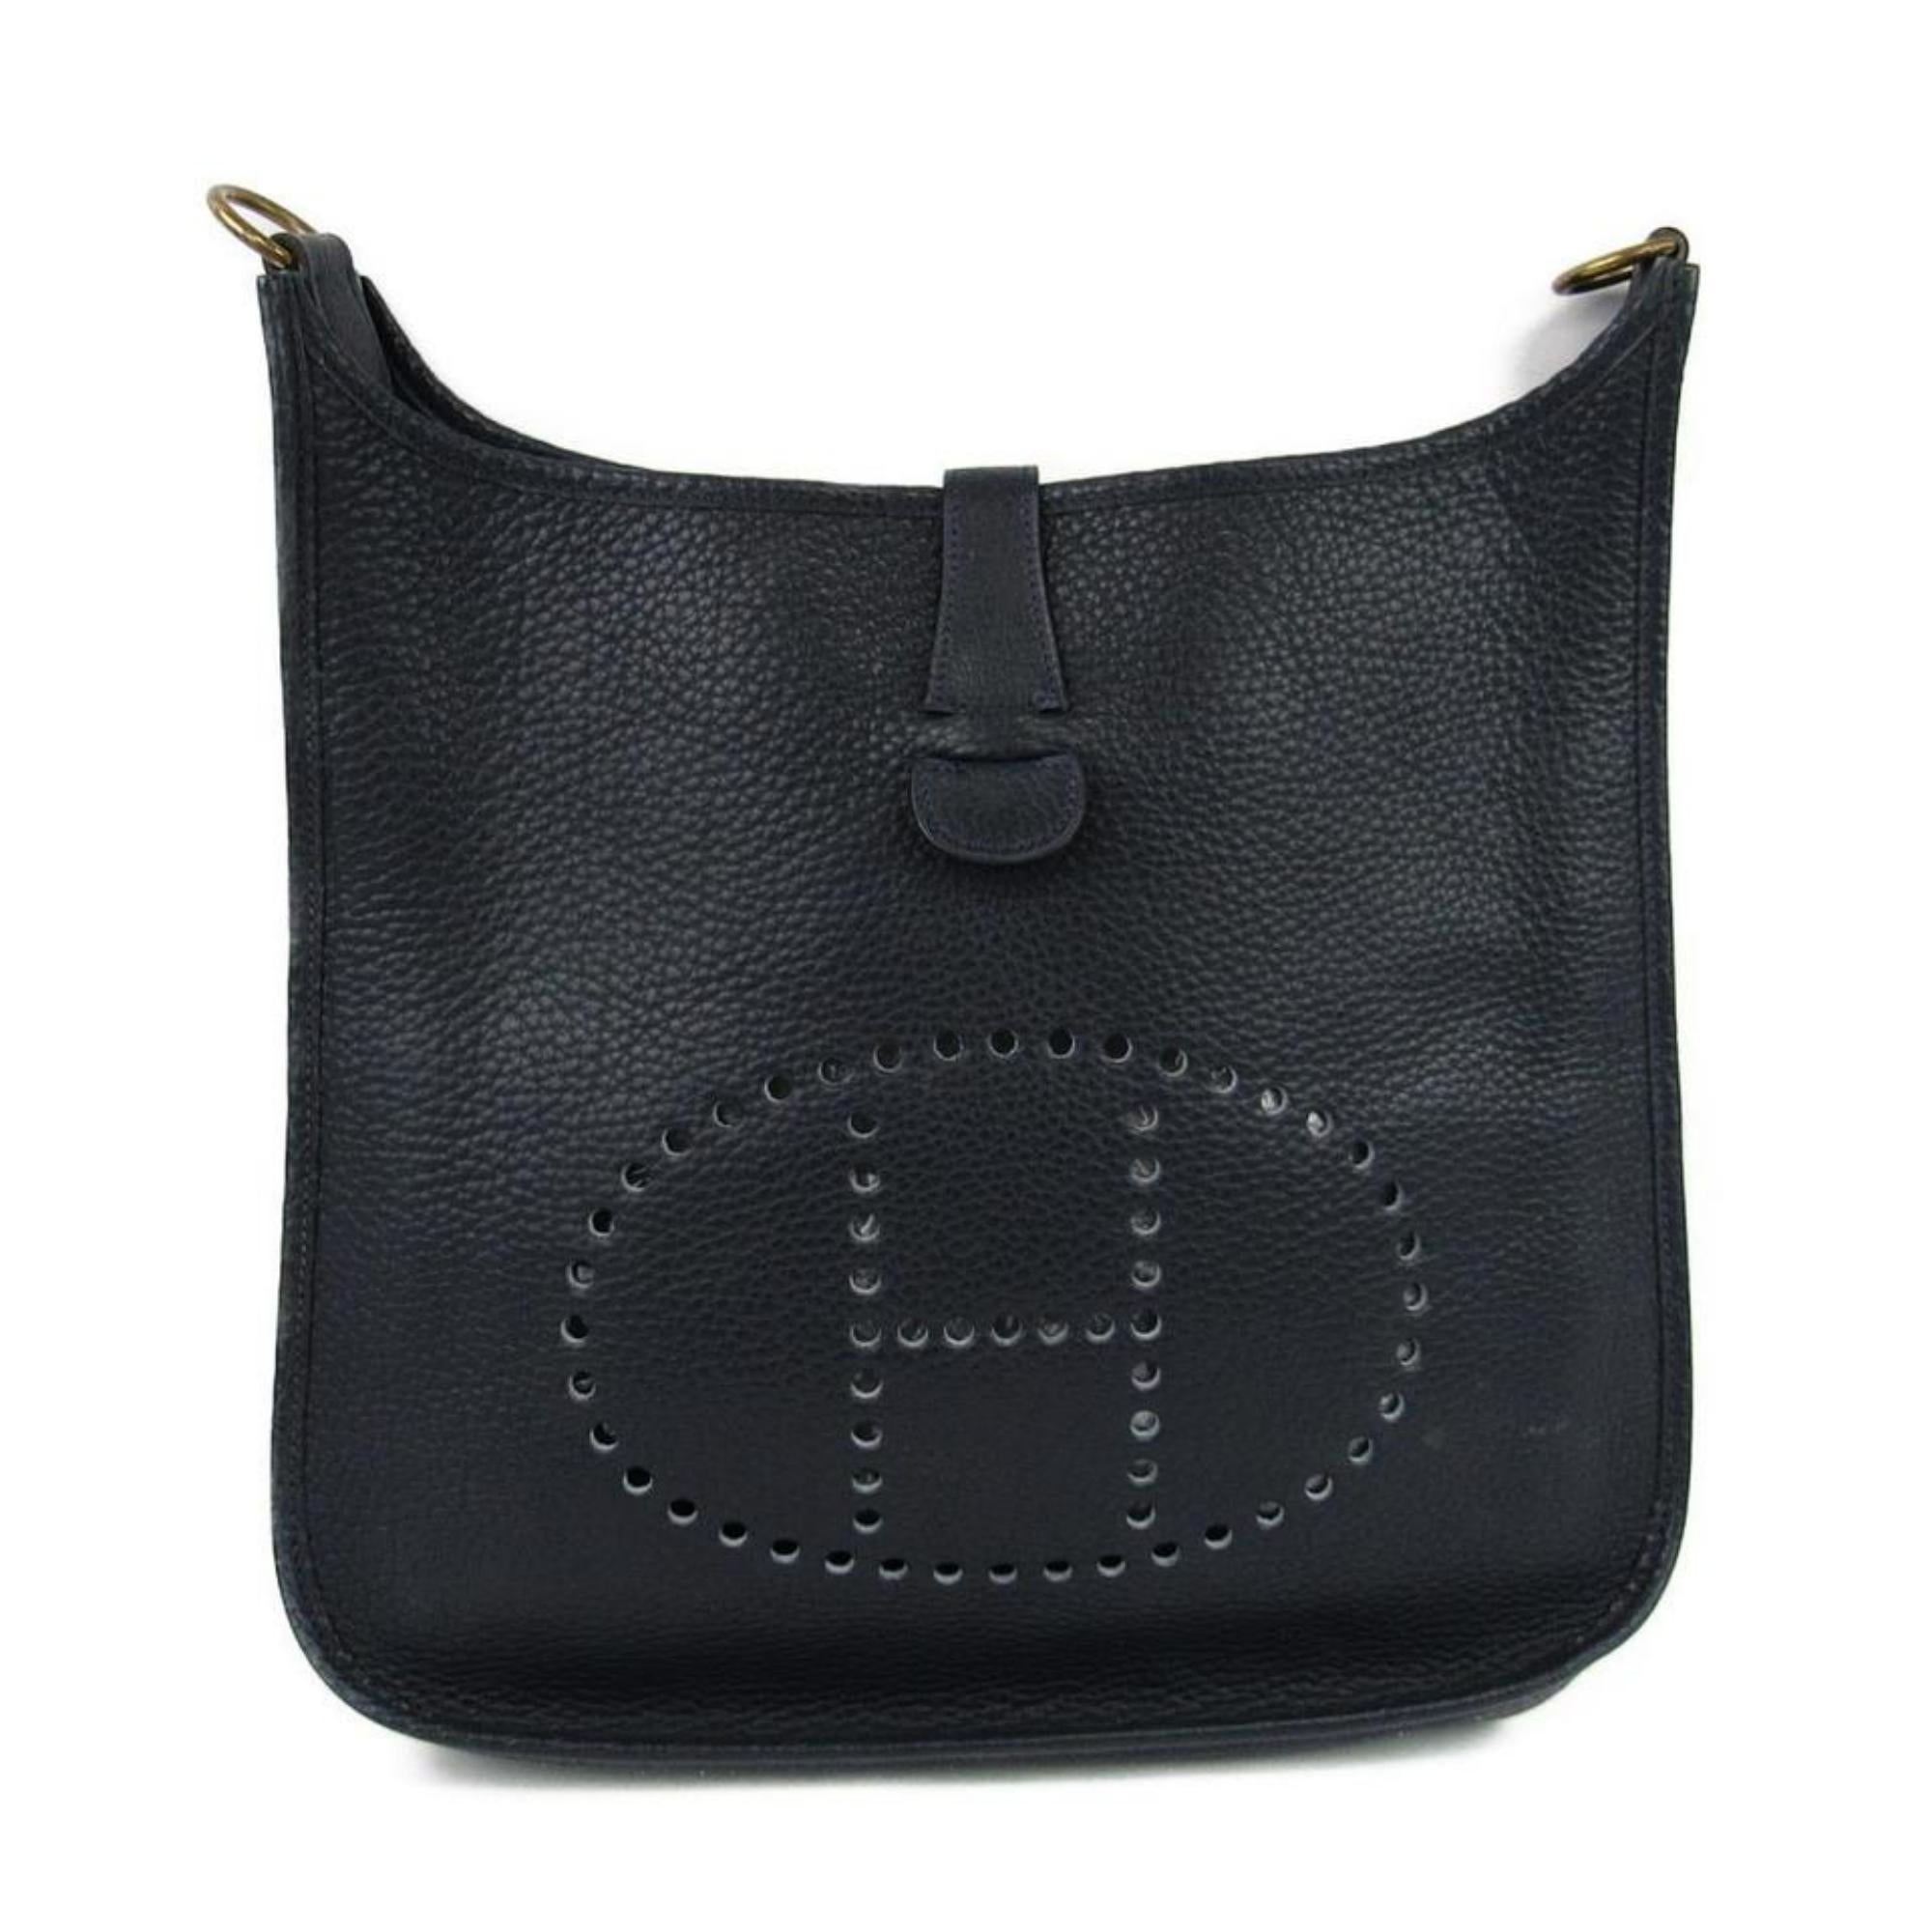 Brand Name HERMES
Item Name Evelyne GM shoulder messenger bag
Color Navy Blue
Material Togo leather
Stamp S in Circle (1989 Year)
Base Length: 12.5 in
Width: 3.5 in
Height: 12.25 in
Drop: 17.75 in

VERY GOOD CONDITION
(7.25/10 or B+)
Retail